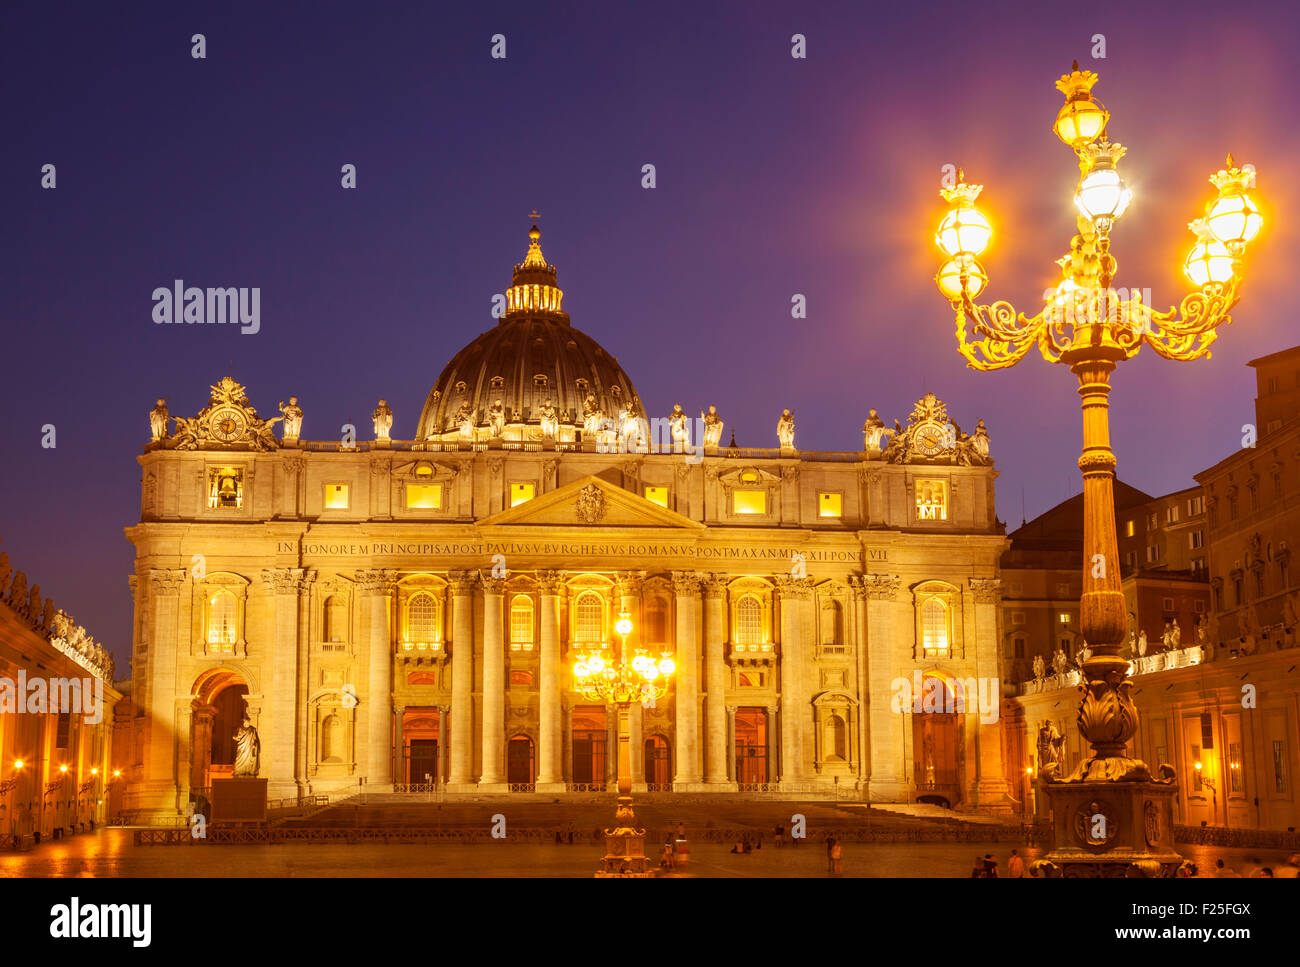 St Peters Square and St Peters Basilica Vatican City at night Roma Rome Lazio Italy EU Europe Stock Photo